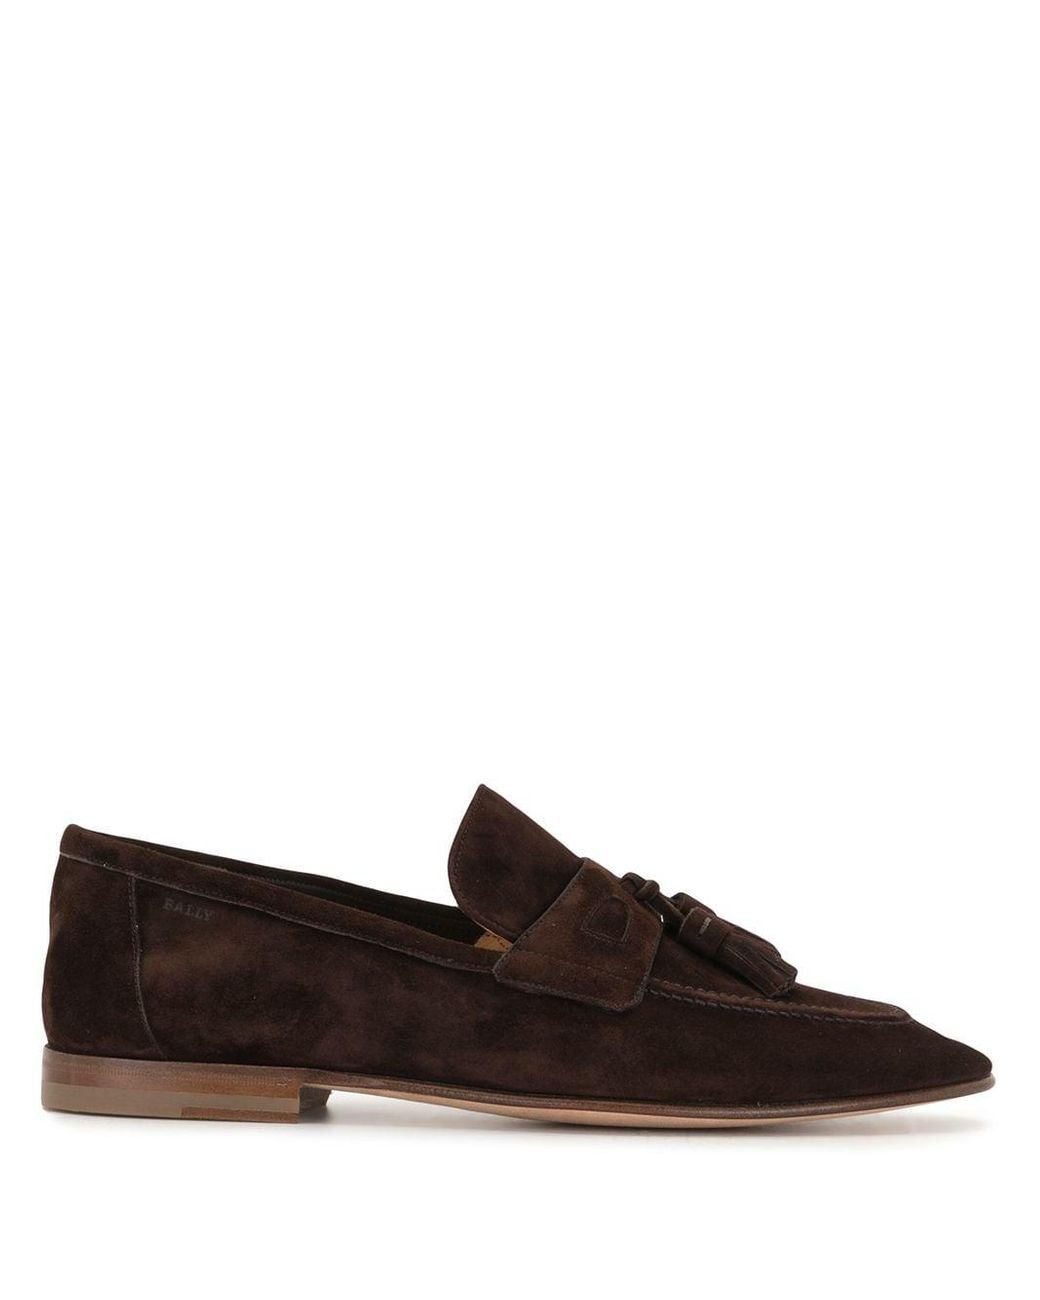 Bally Tasseled Suede Loafers in Brown for Men - Lyst